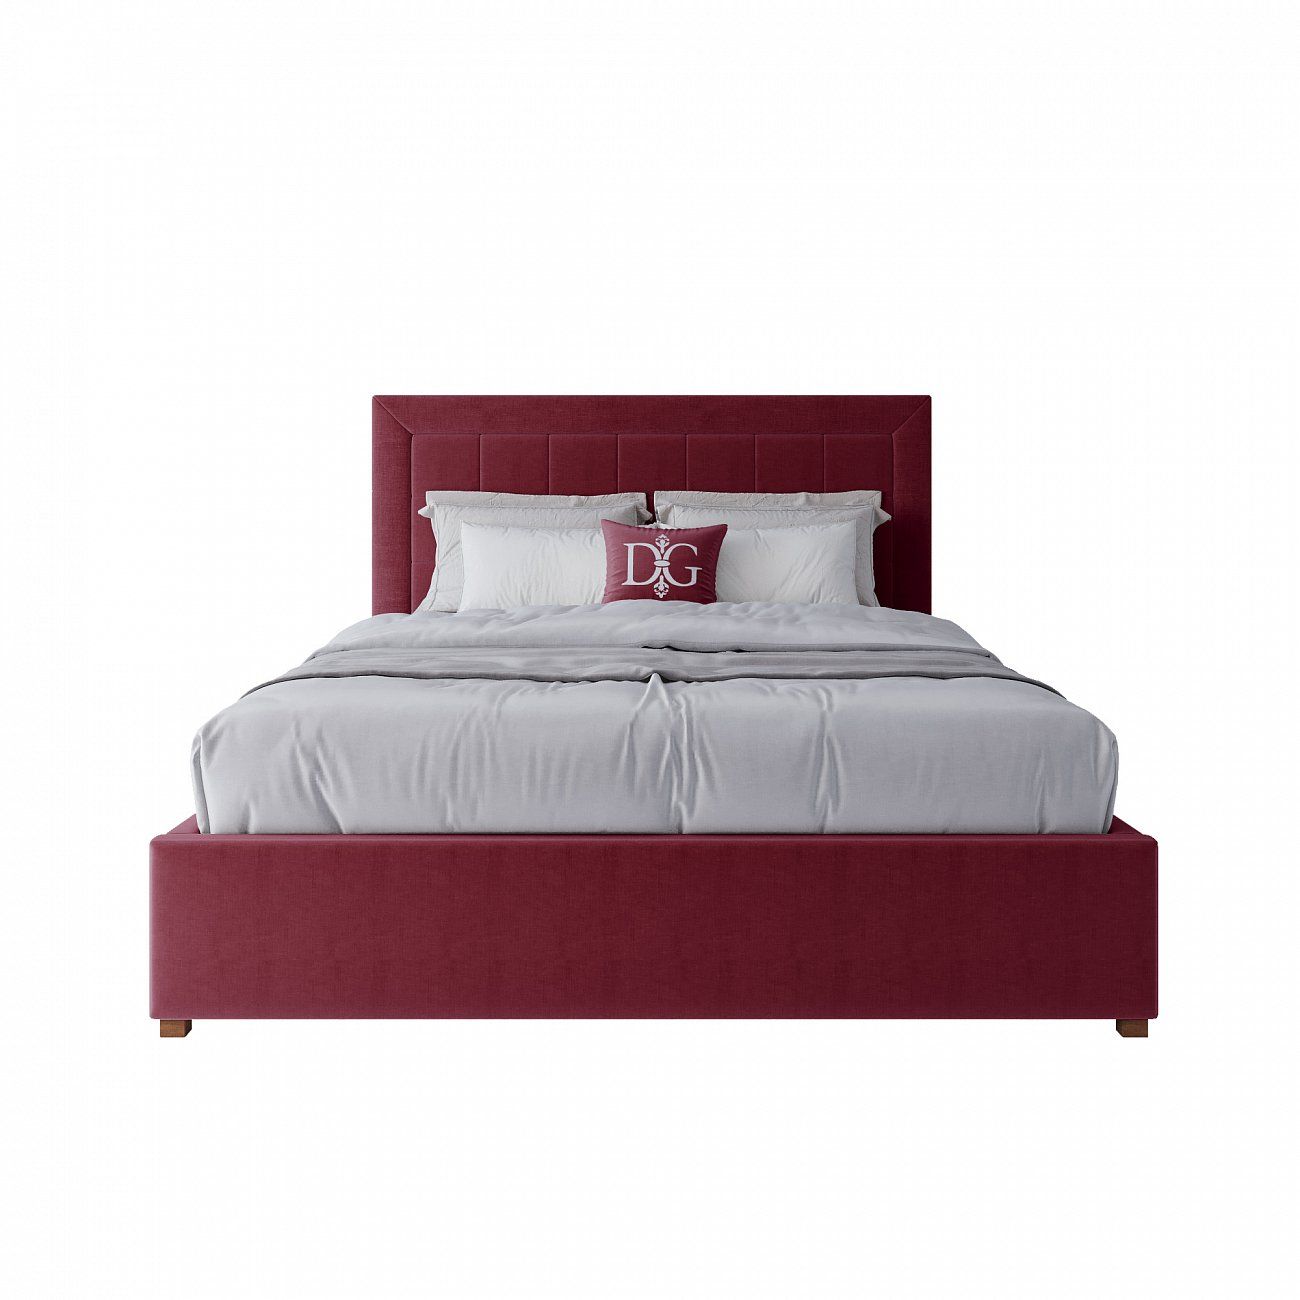 Double bed 160x200 cm red Elizabeth